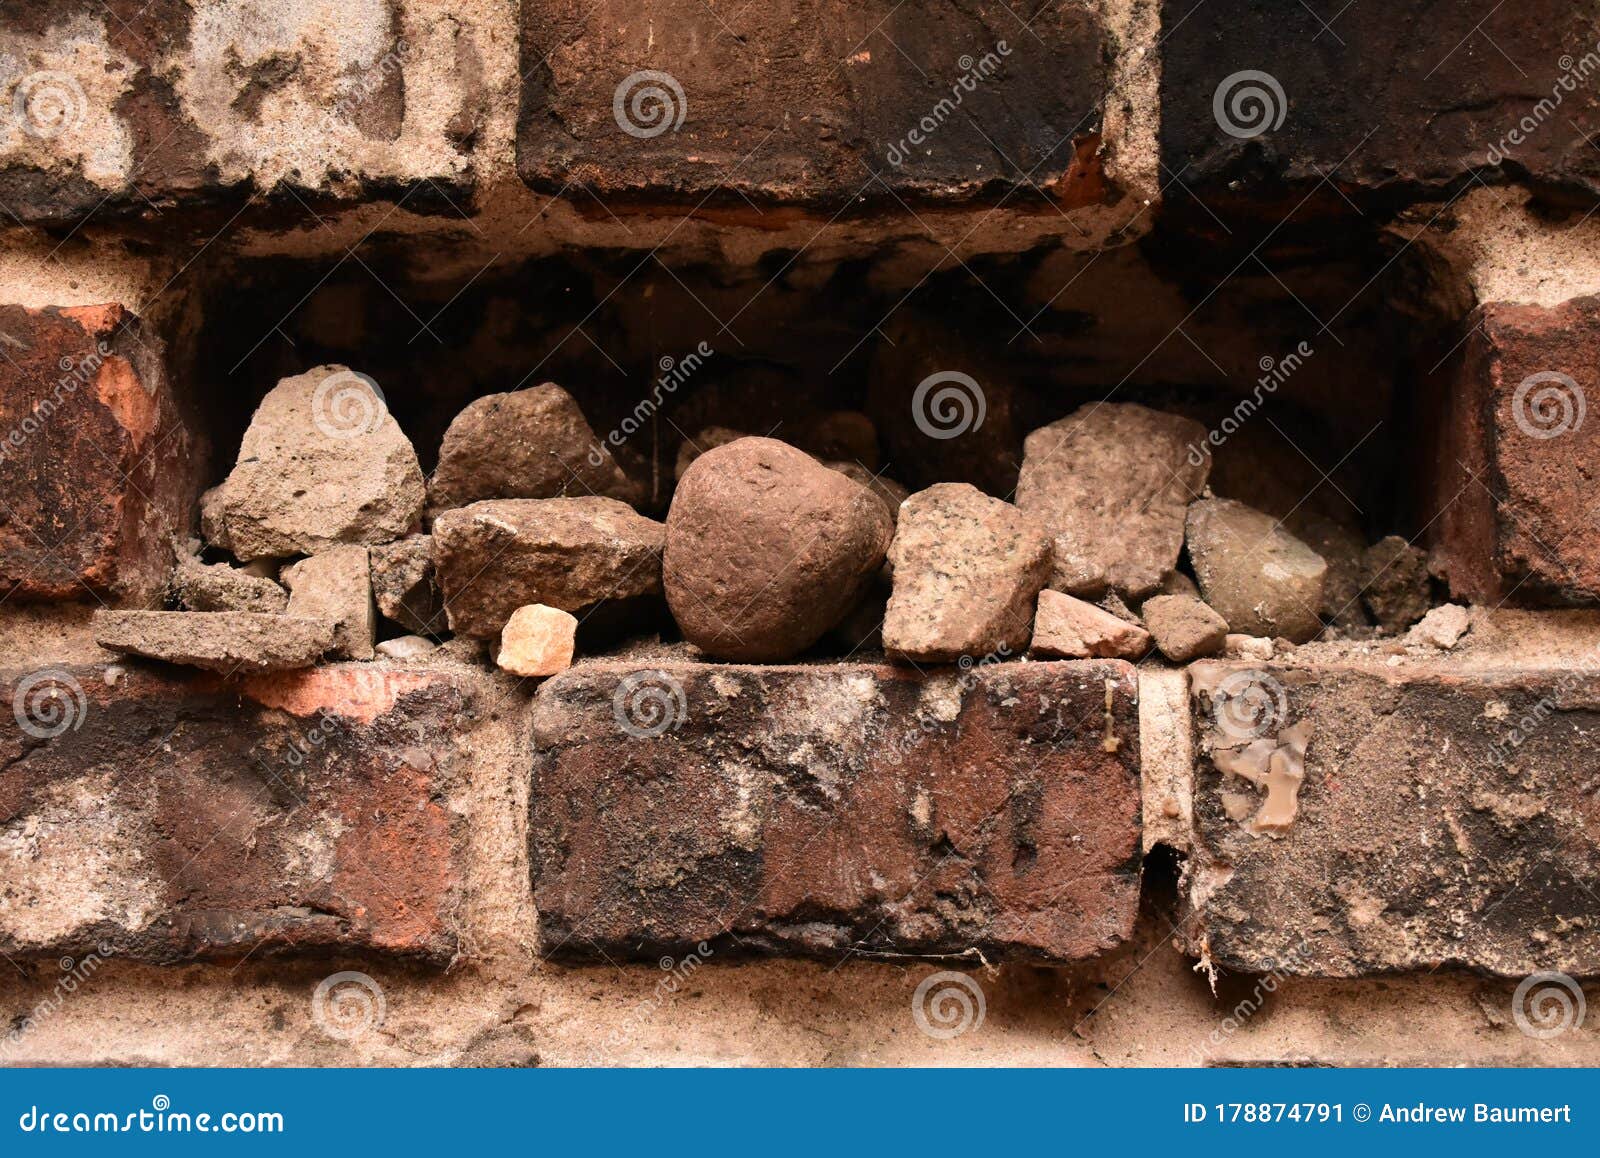 warsaw ghetto remnant wall with stones in warsaw poland